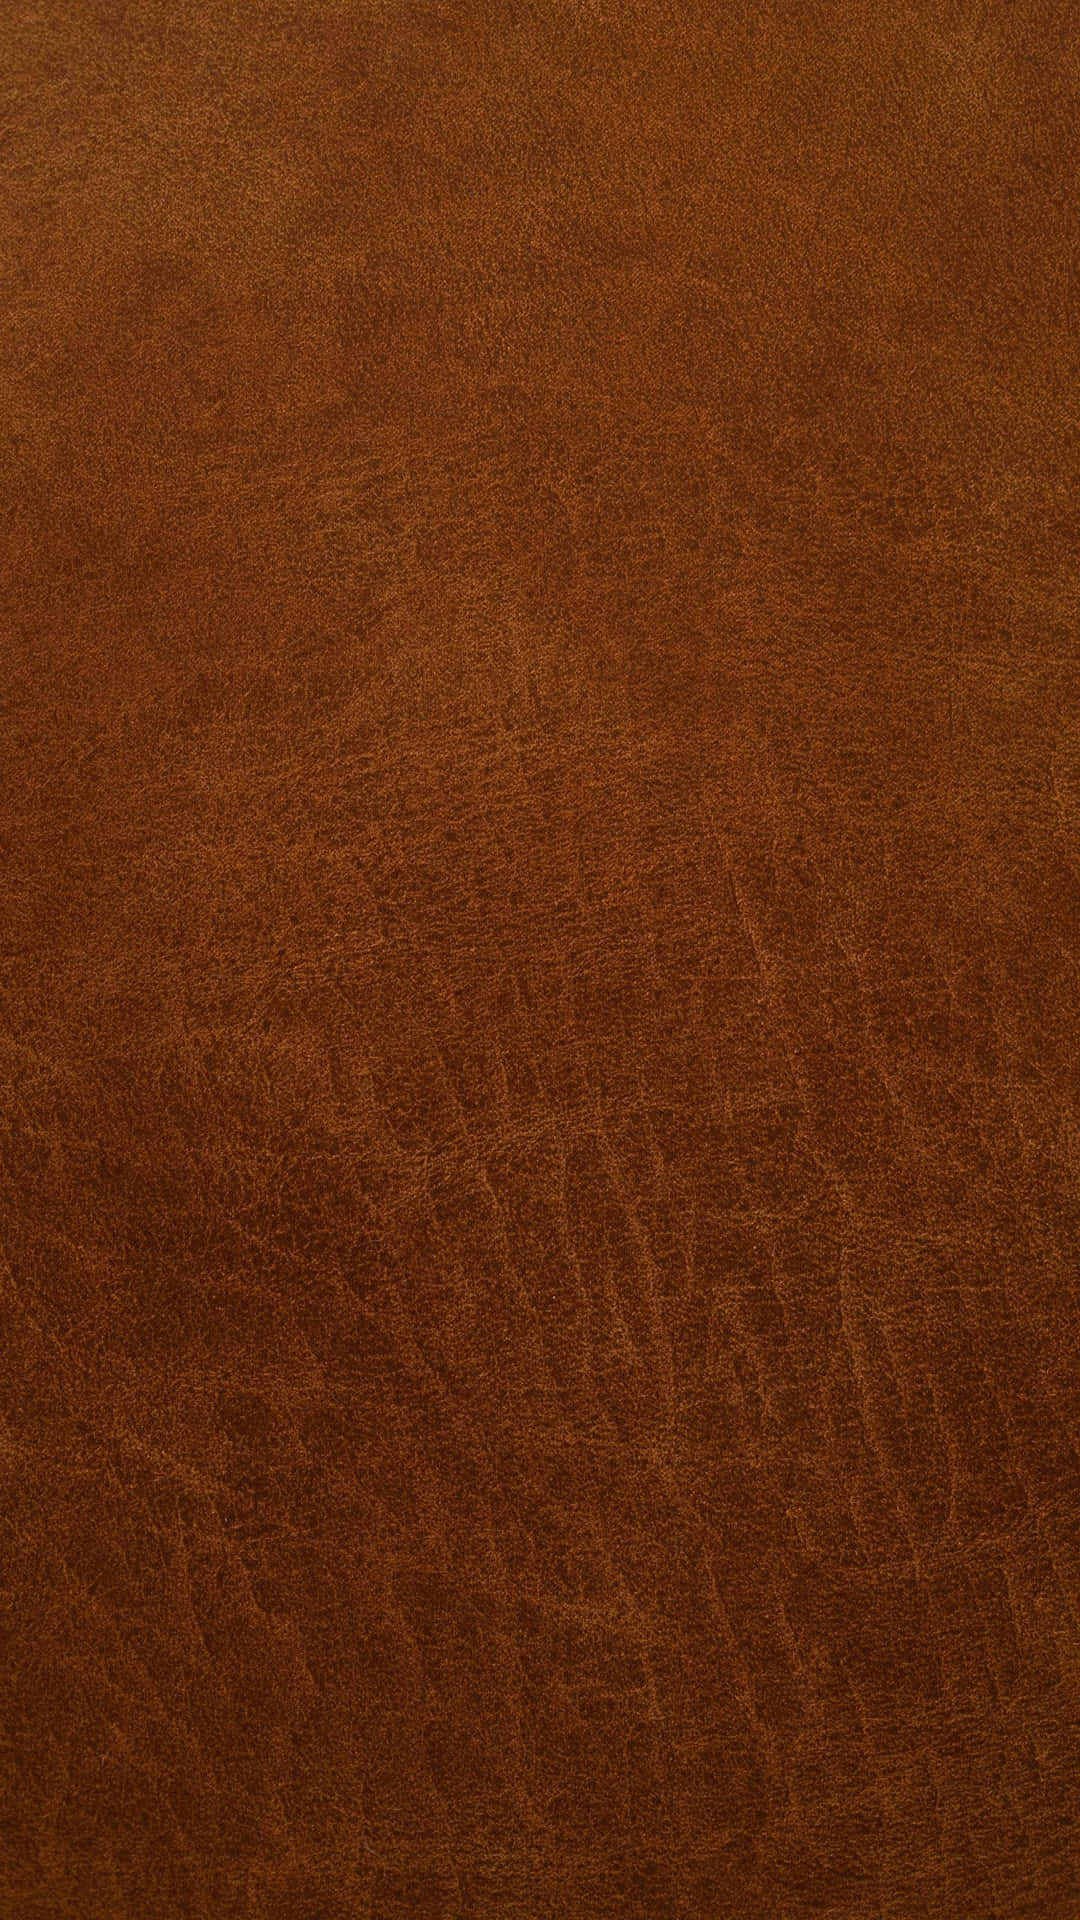 Brown Lines Leather Texture Wallpaper